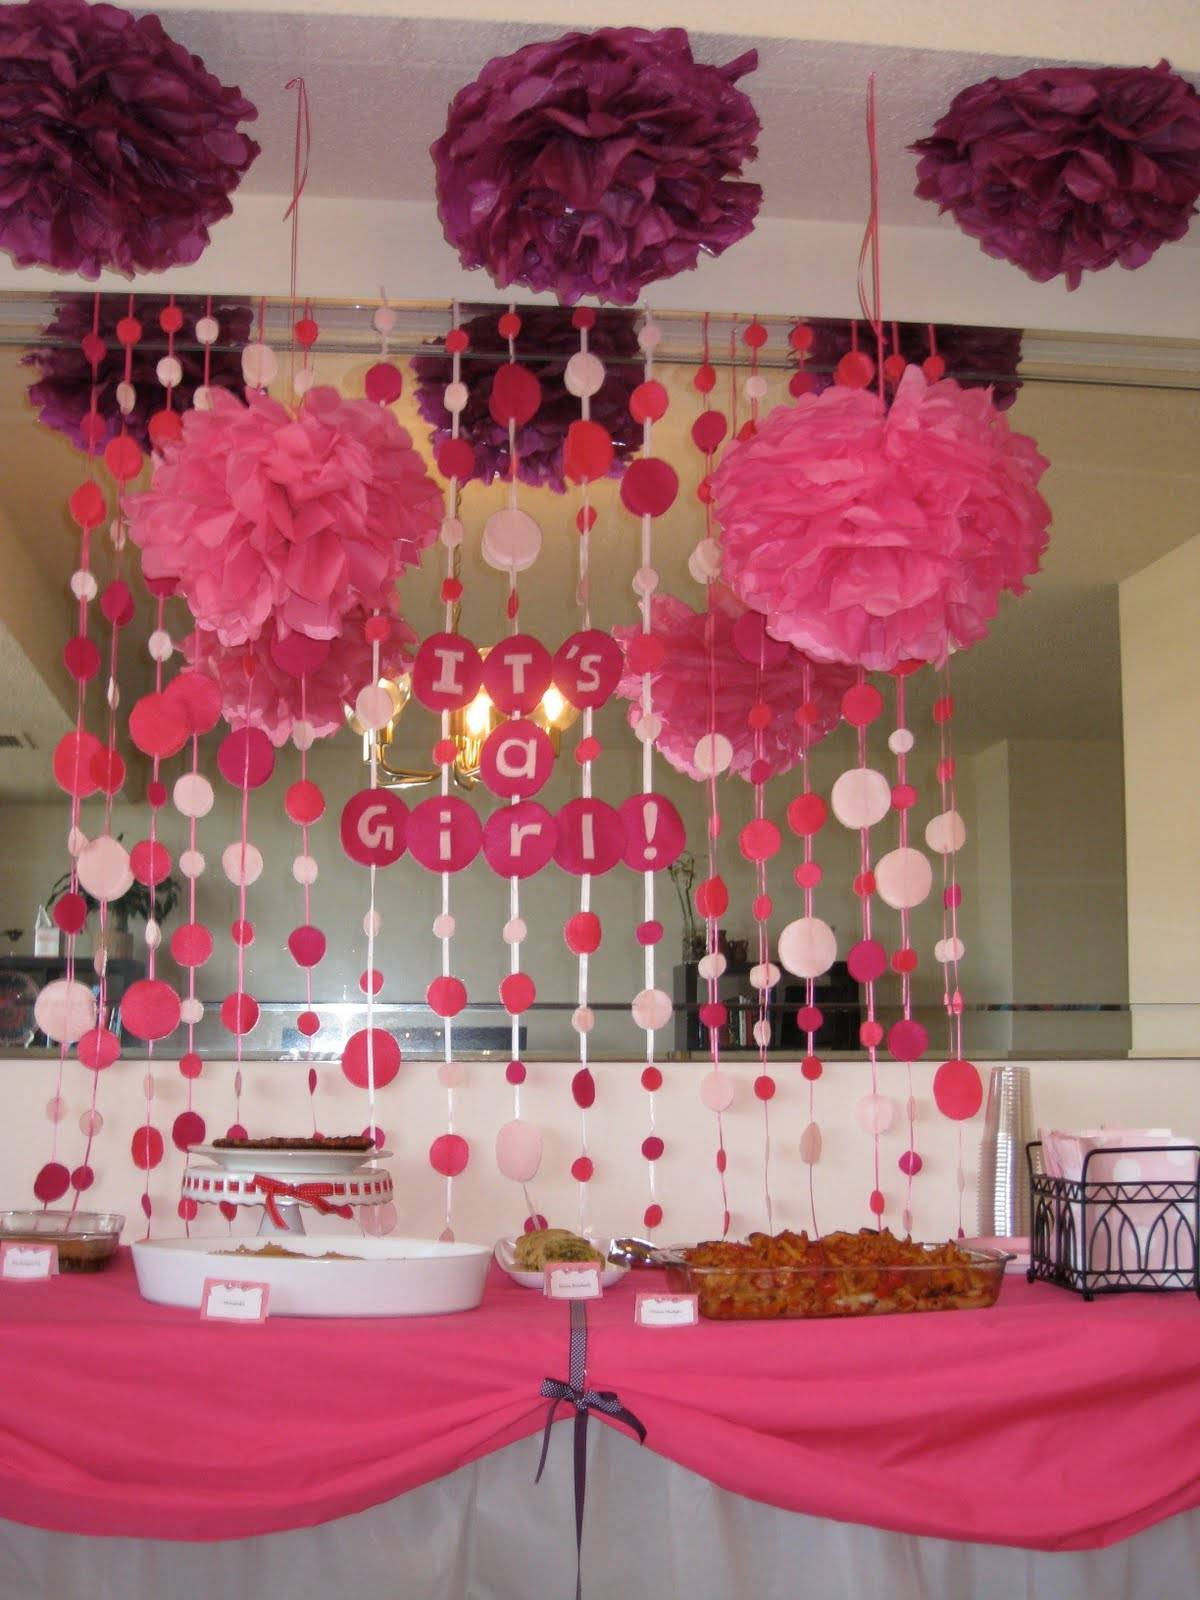 Decoration Ideas For Baby Shower
 Creative Baby Shower Decorating Ideas